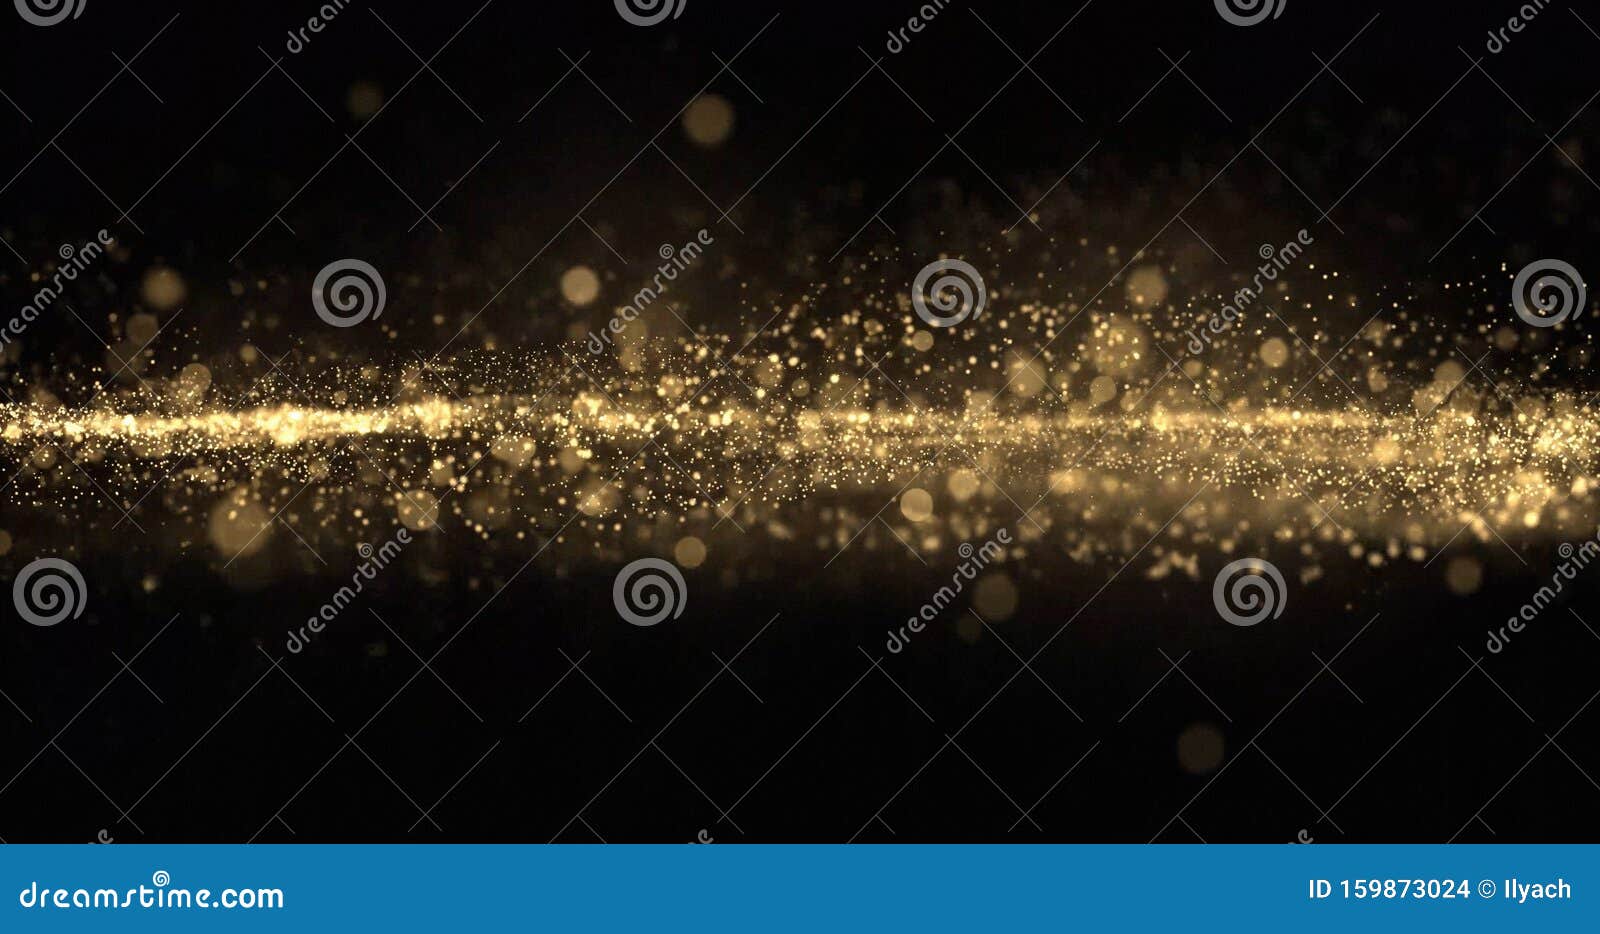 gold glitter particles wave background, shining gold sparks and yellow glittery bokeh light. gold glow and shimmering sparkles